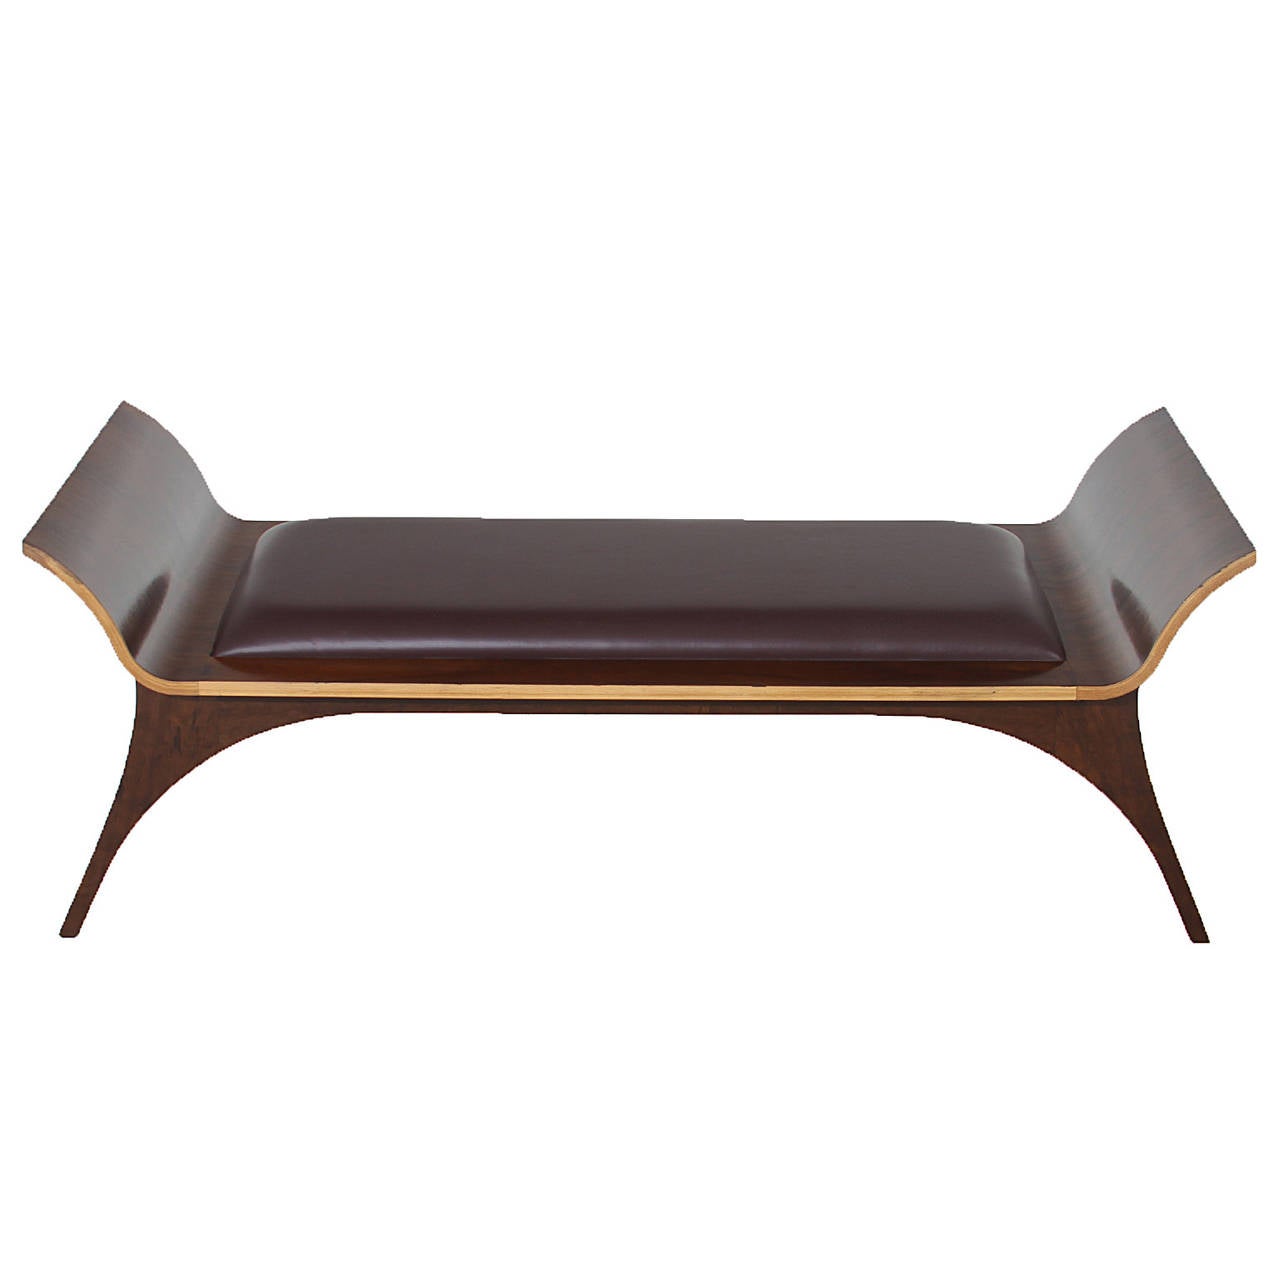 An elegant rosewood bench from Brazil. The seat is upholstered in a burgundy leather complimenting the red tones of the rosewood. The bench has a sculptural design with the curvaceous legs. 

Cushion size: 45